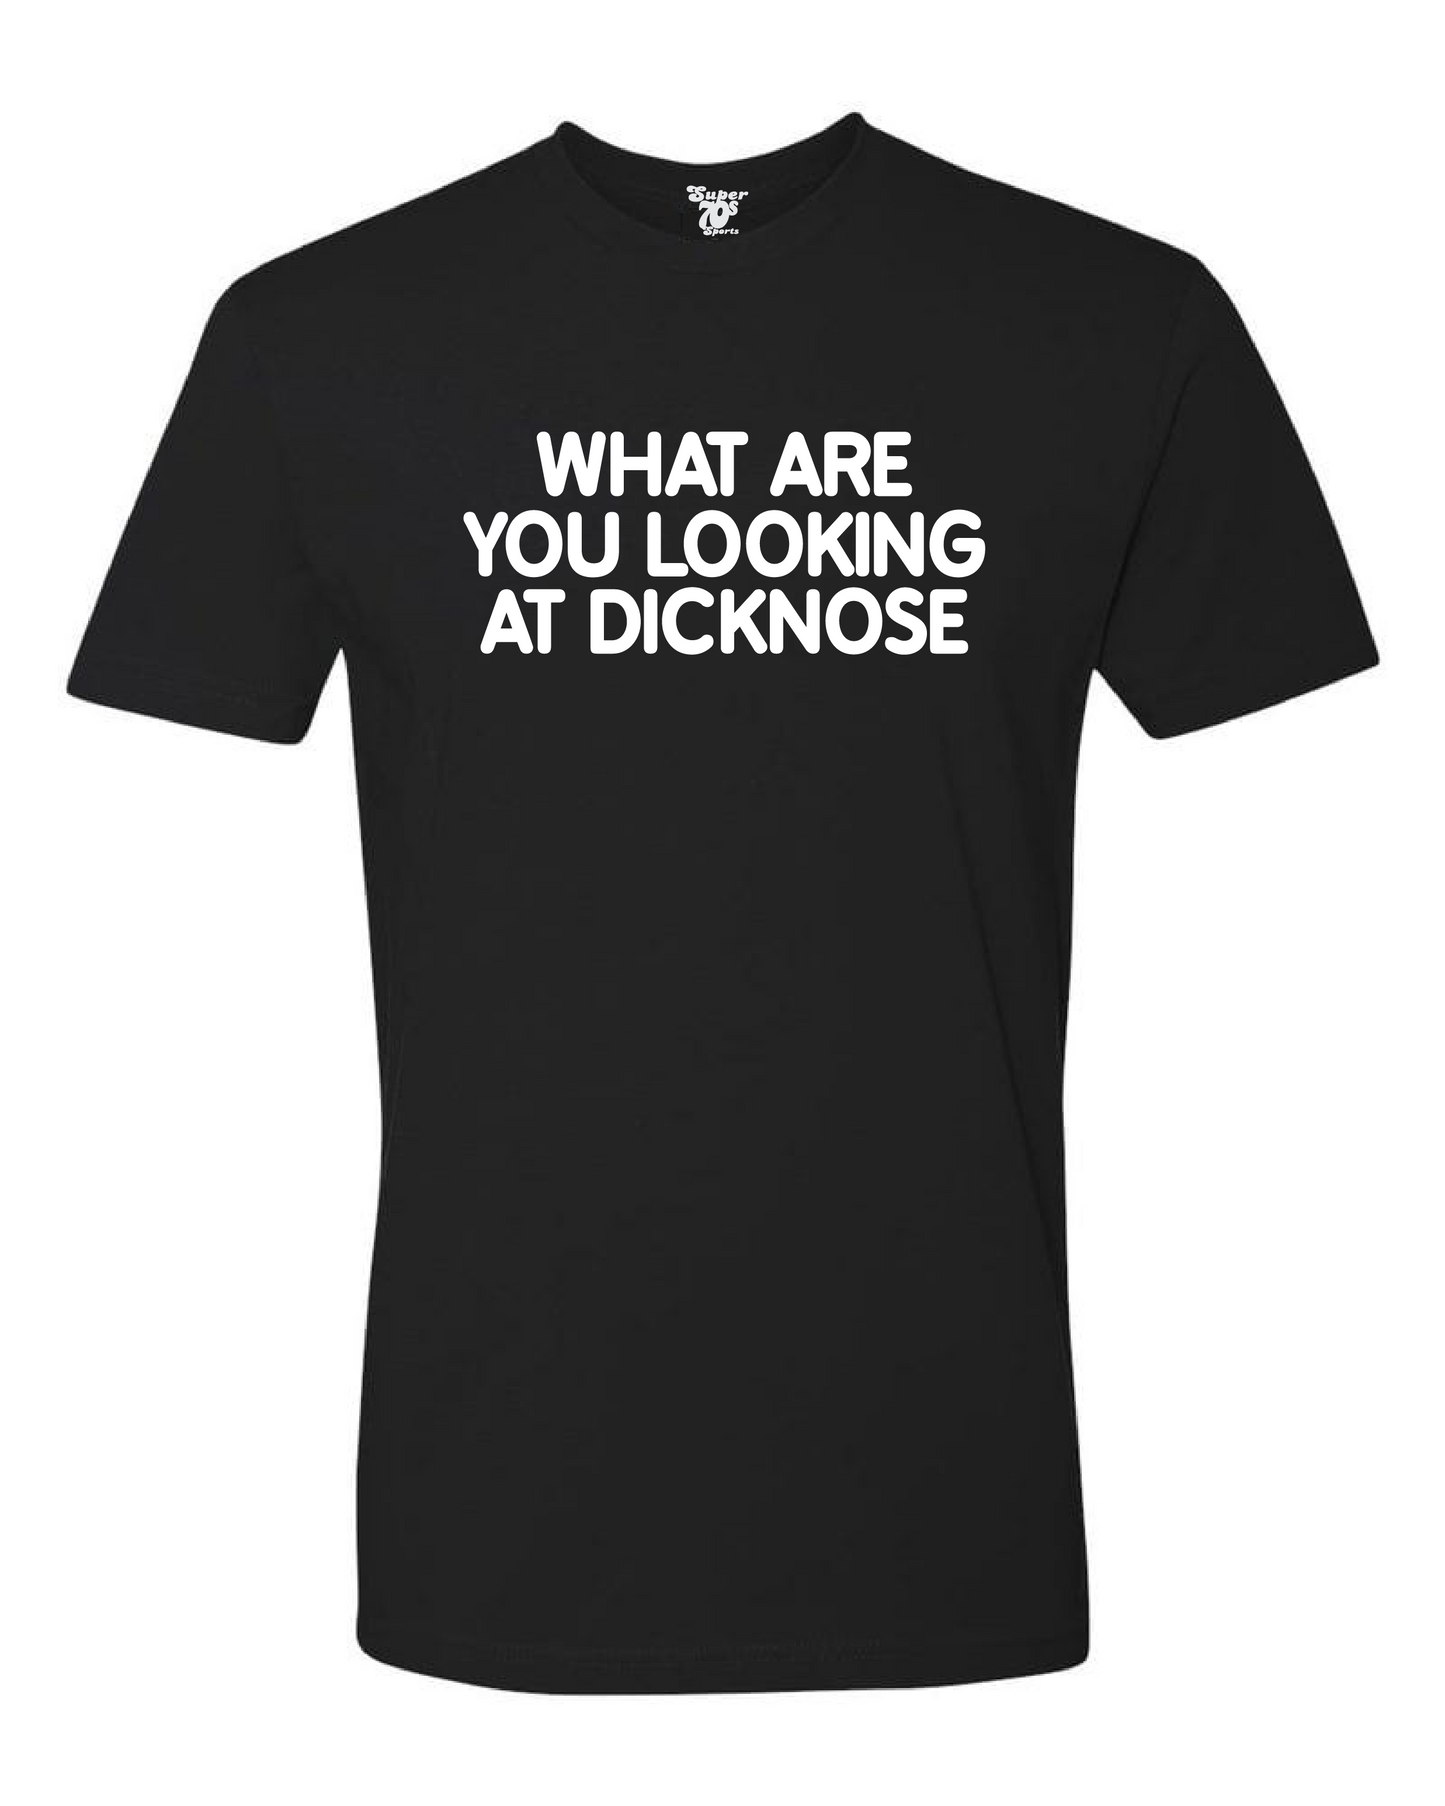 What Are You Looking At Dicknose Tee